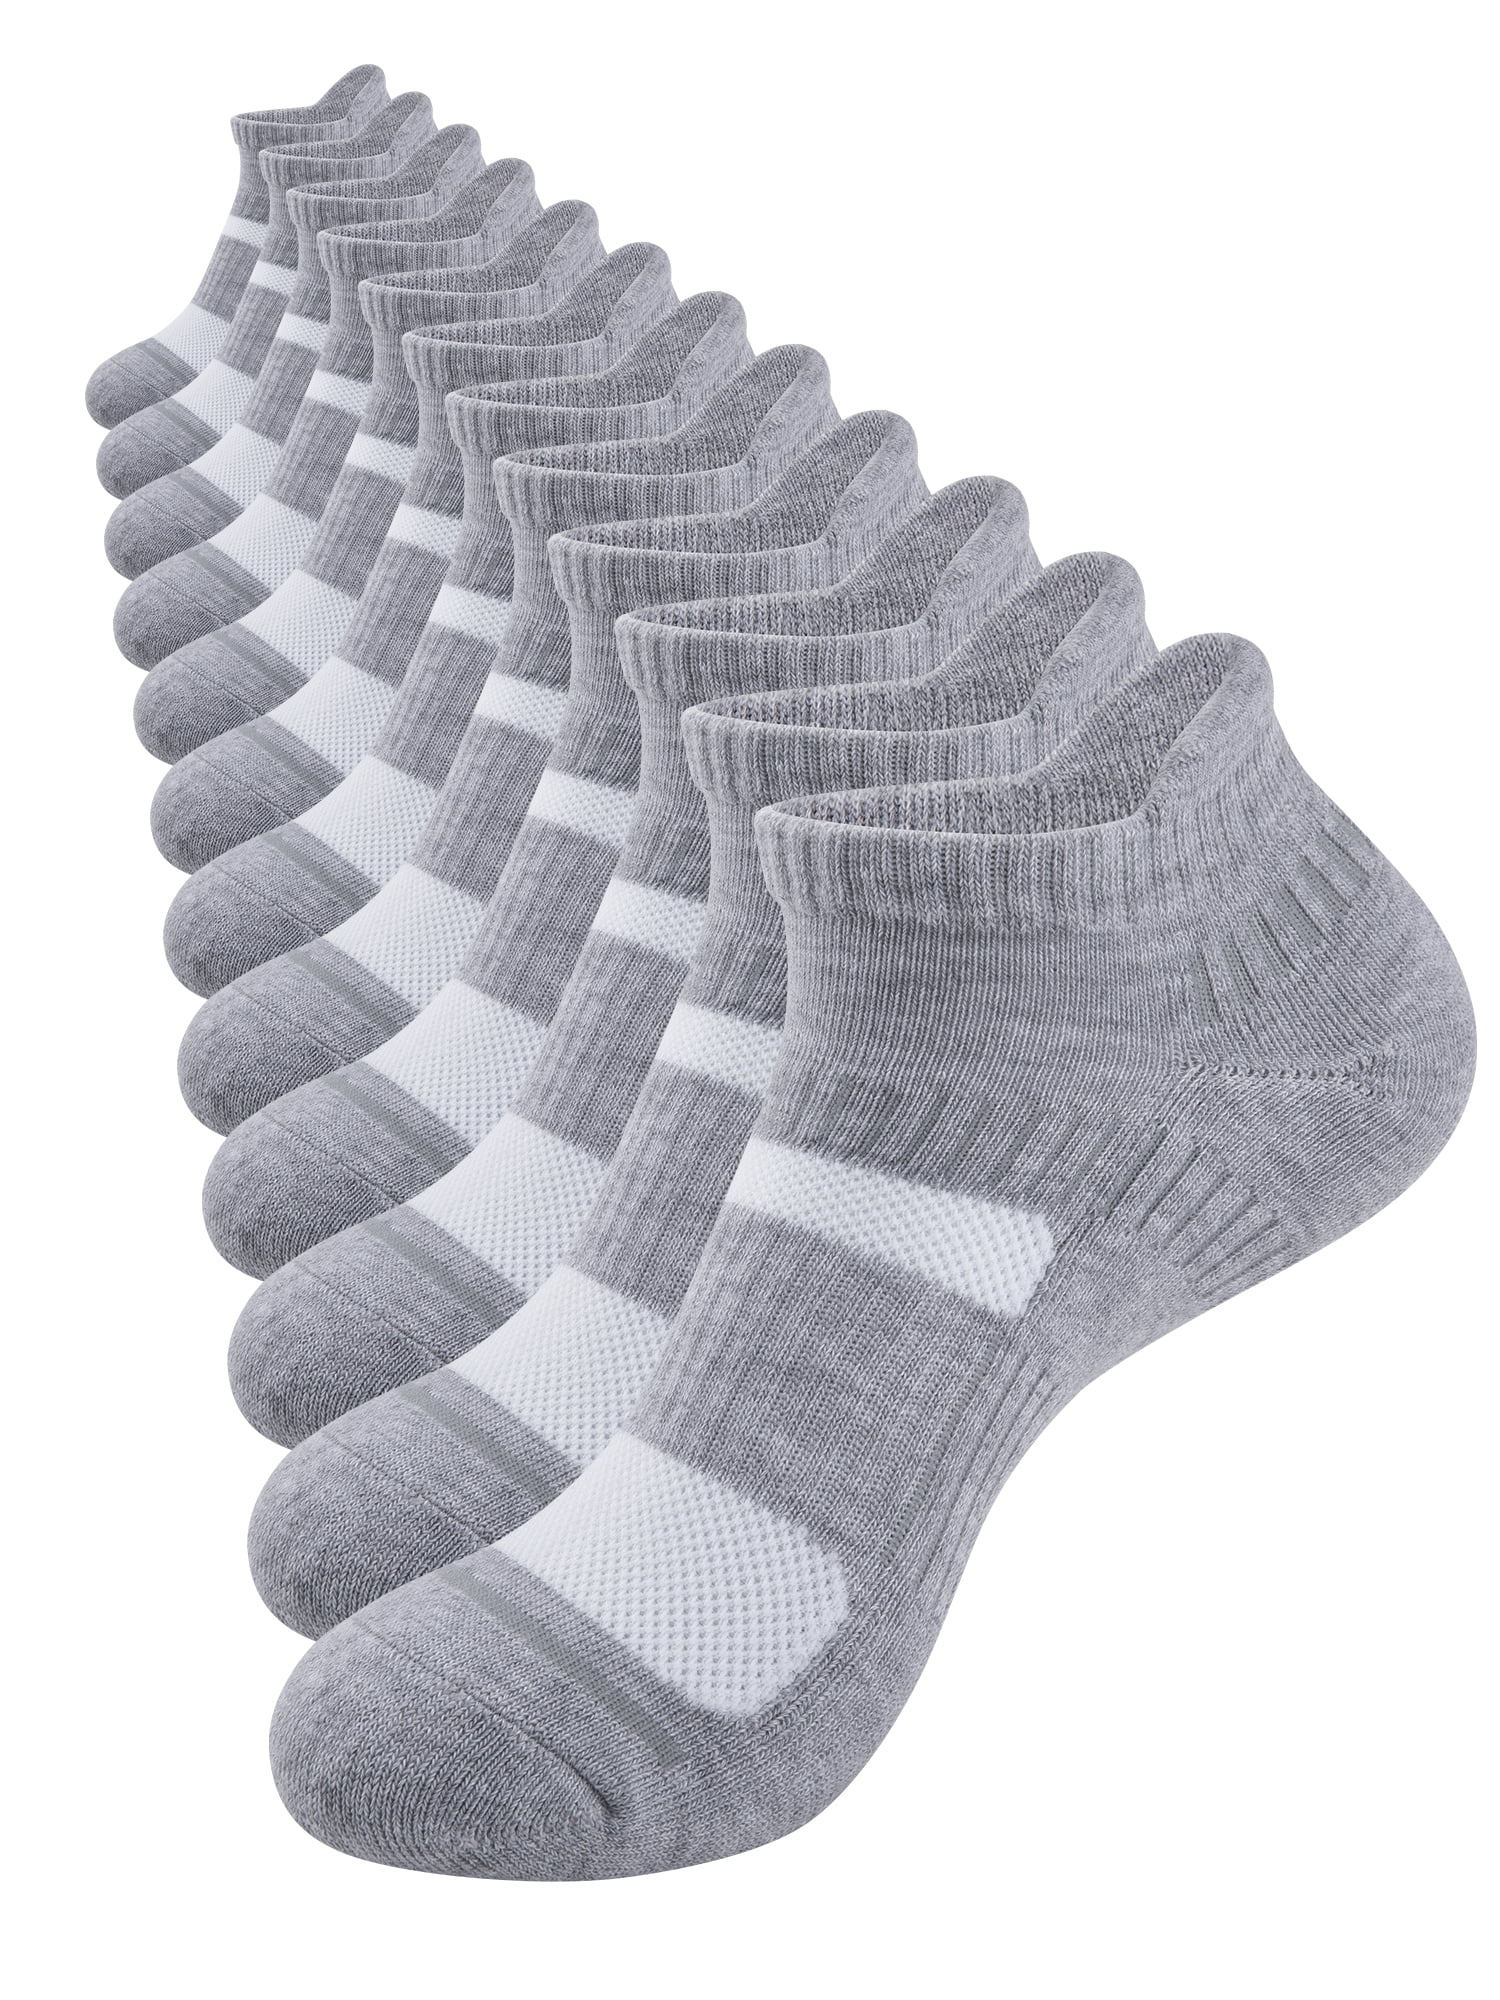 COOPLUS Womens Athletic Ankle Socks Women Cushioned Low Cut Breathable Socks 6 Pairs